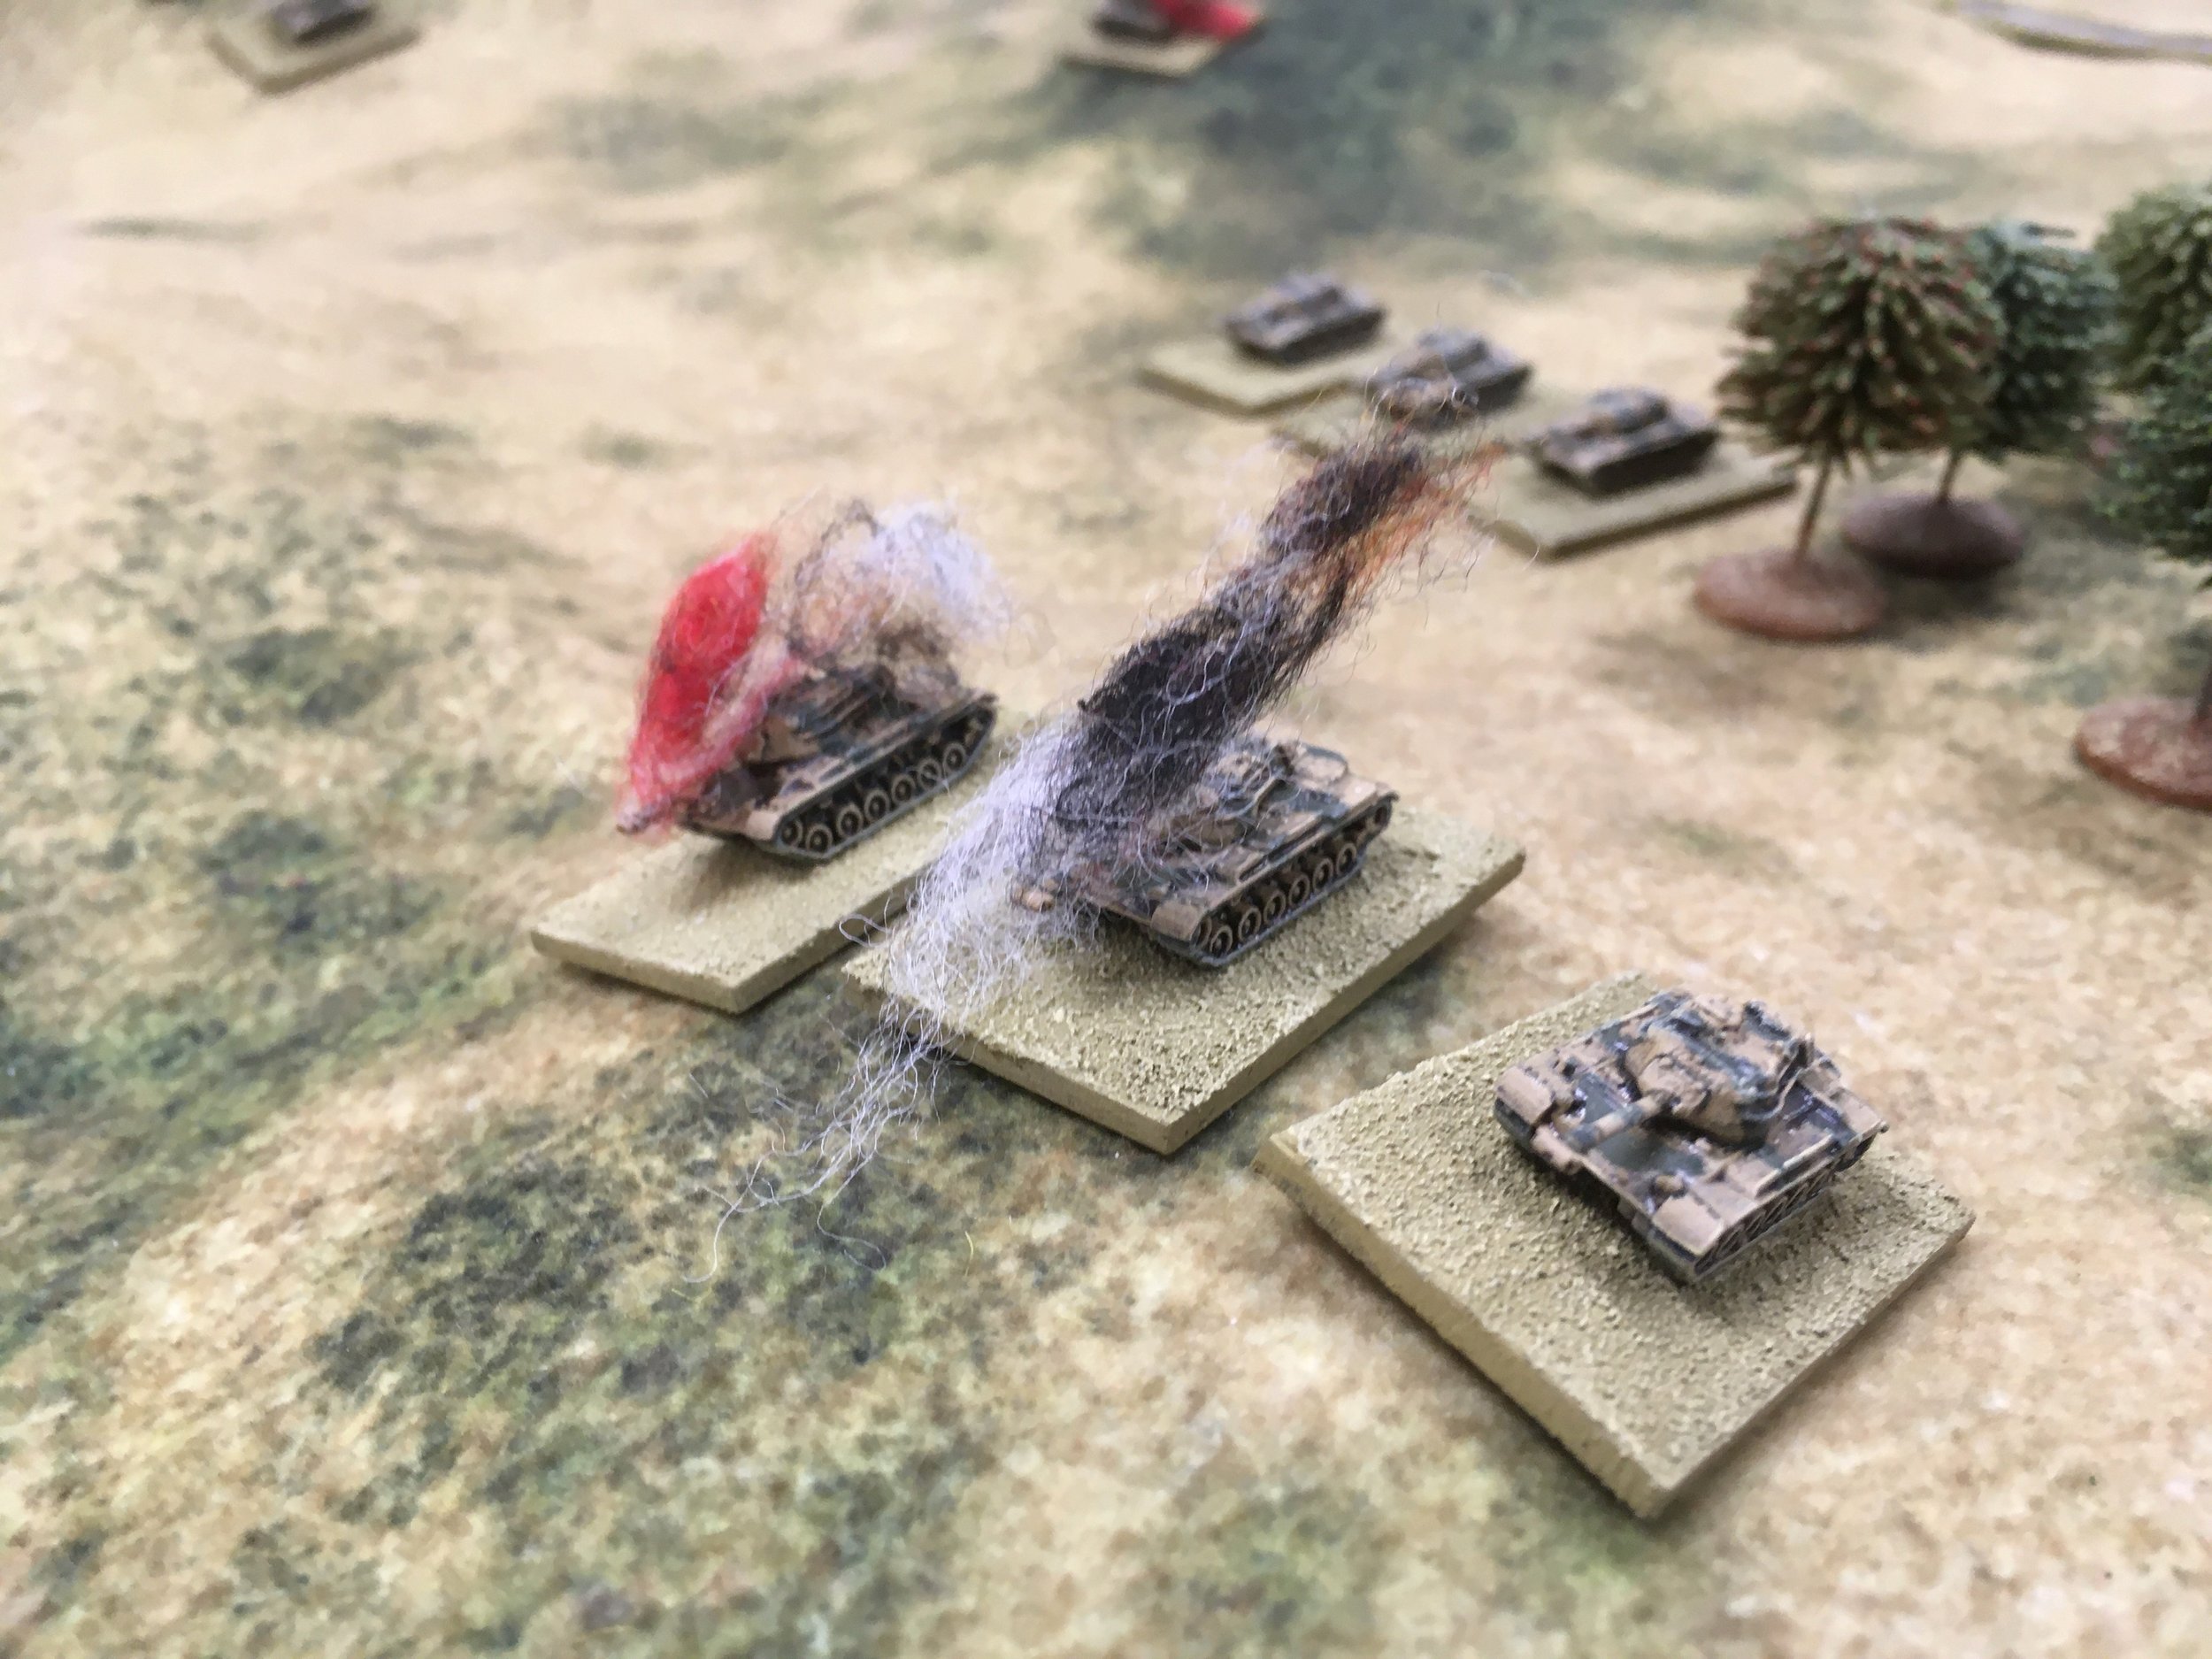 Their 75mm cannon taking out two of the fourth platoon's M-47's...